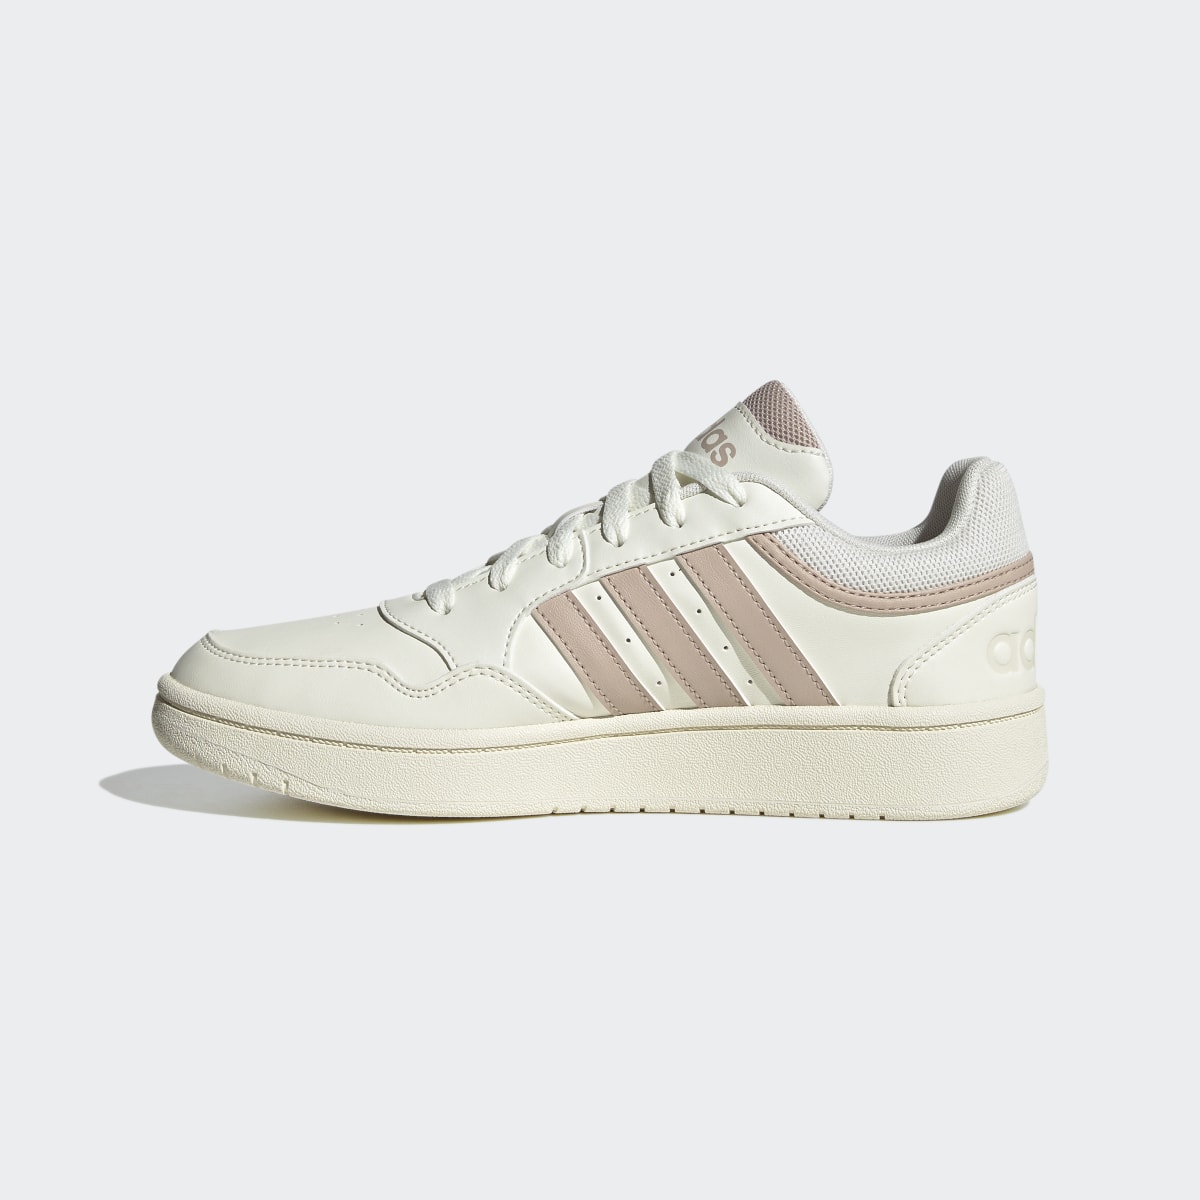 Adidas Hoops 3.0 Mid Lifestyle Basketball Low Schuh. 7